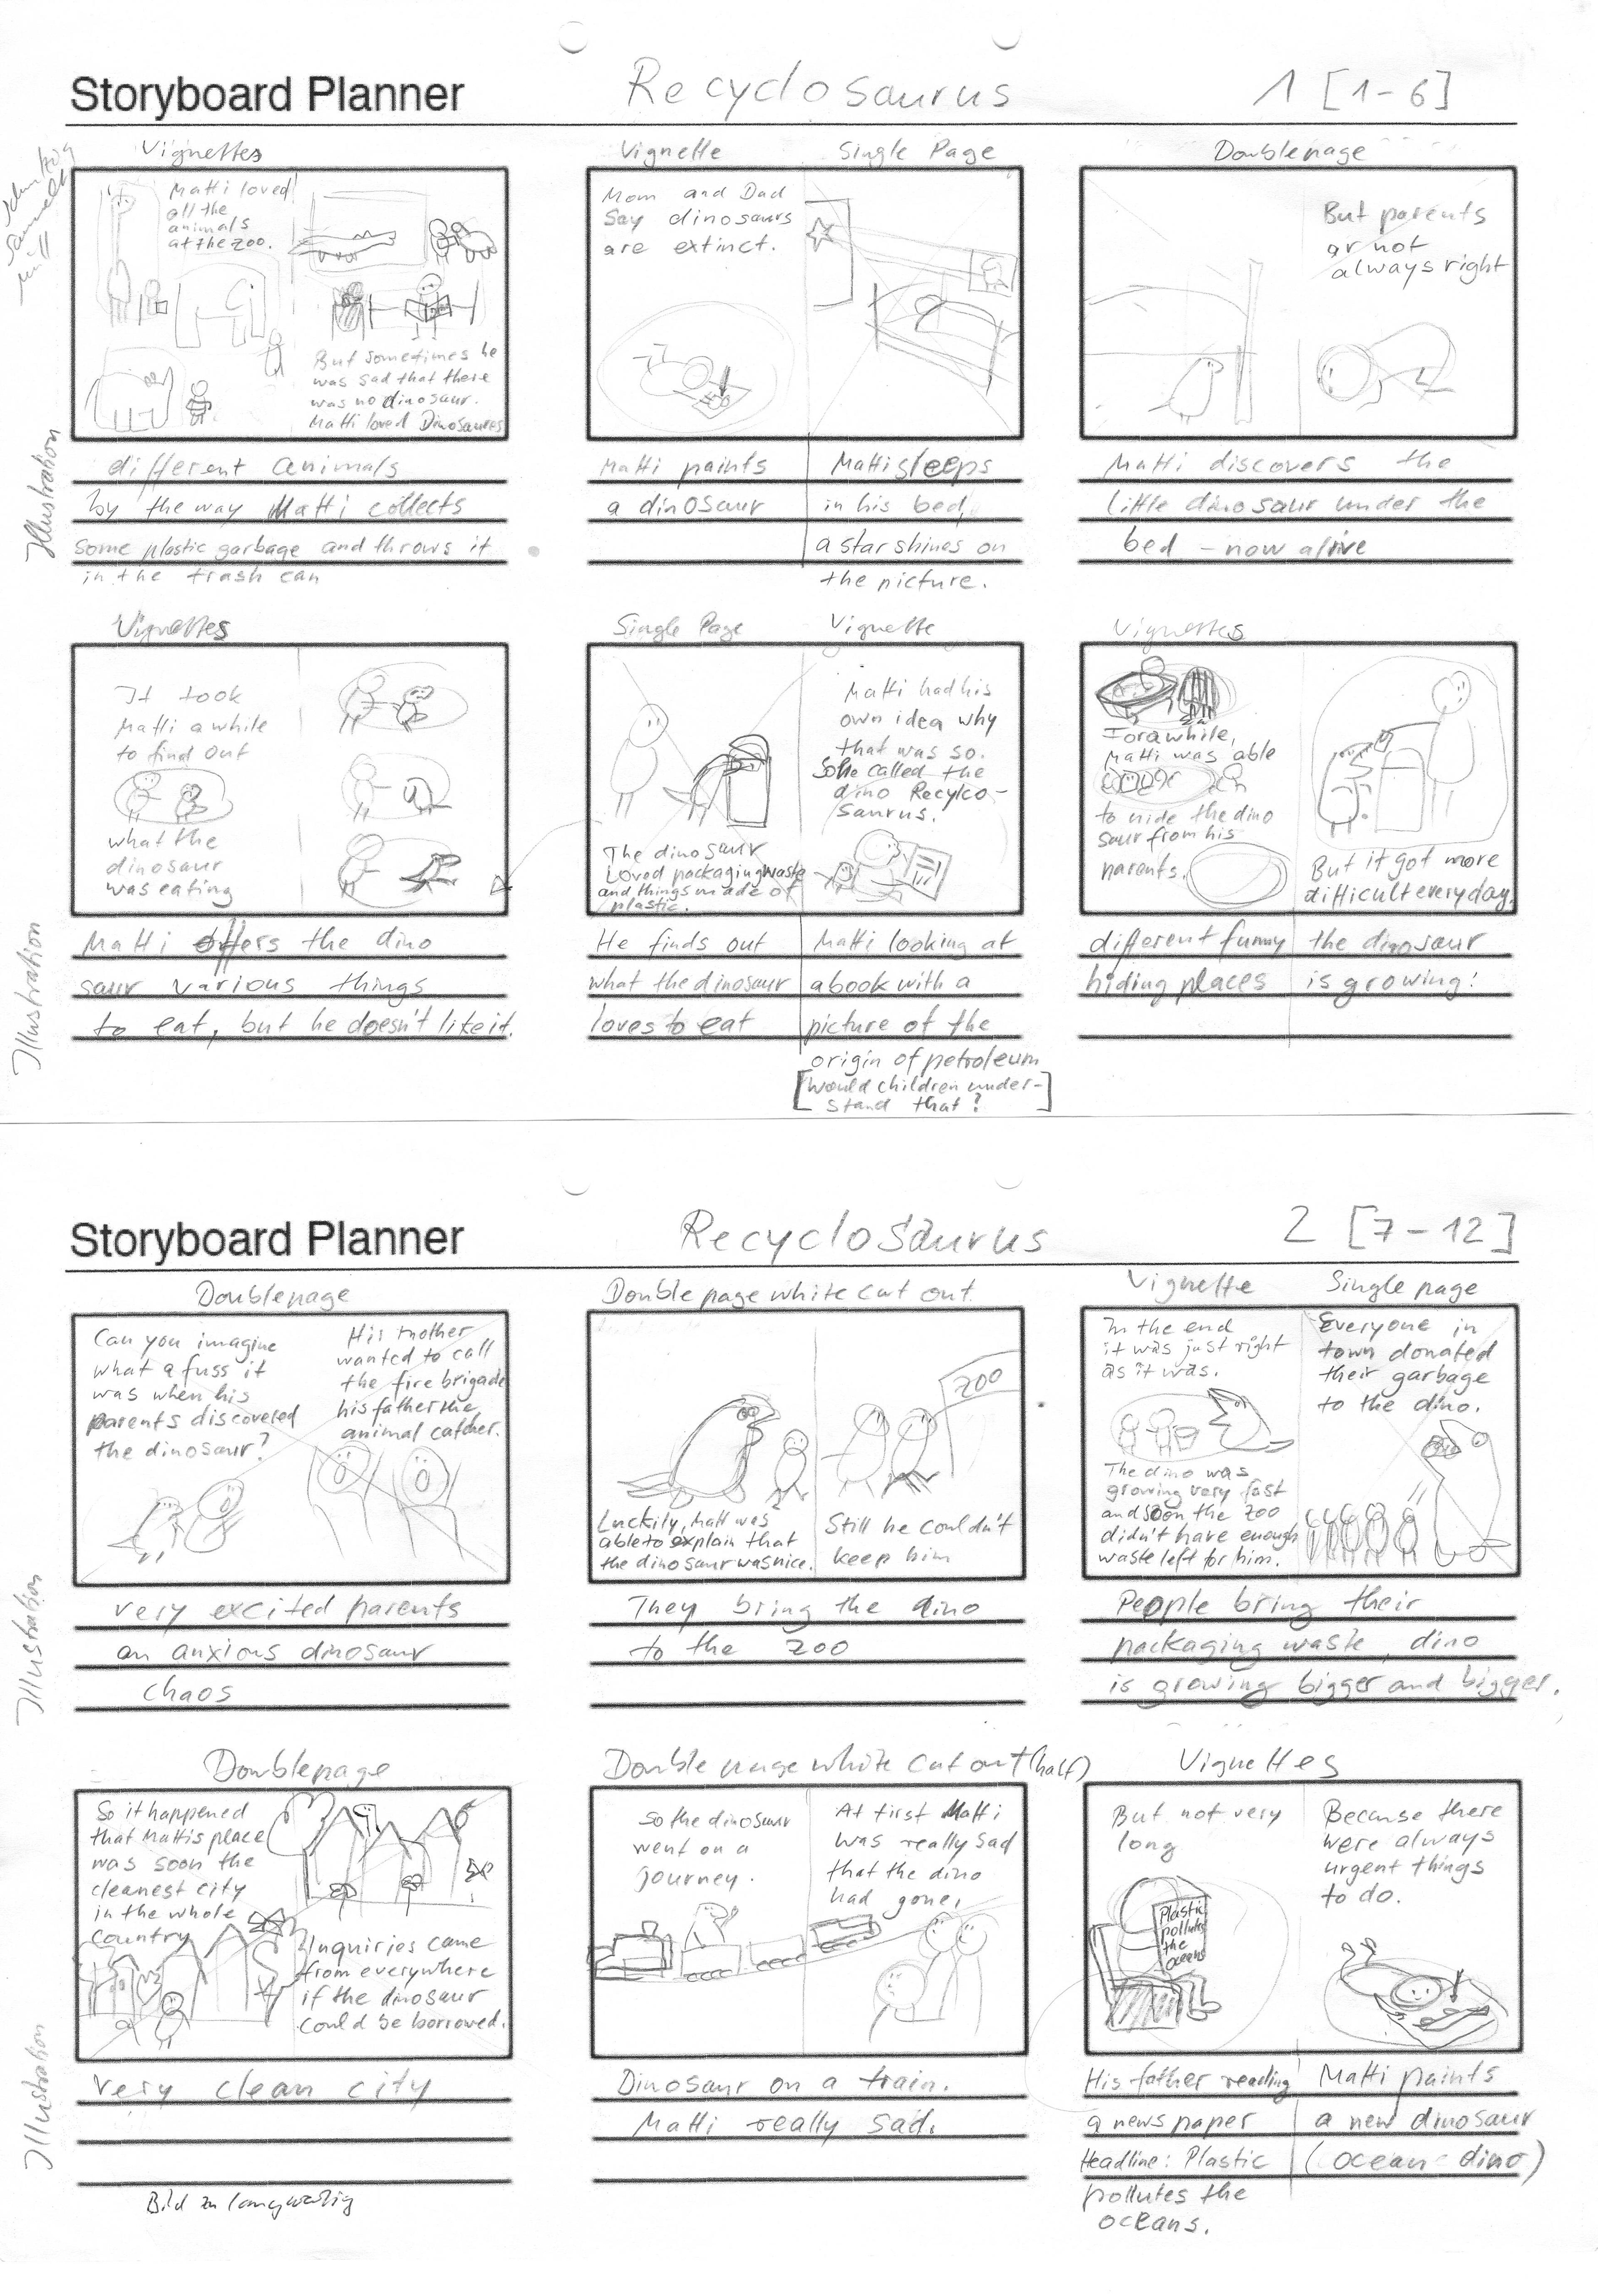 Two storyboards.